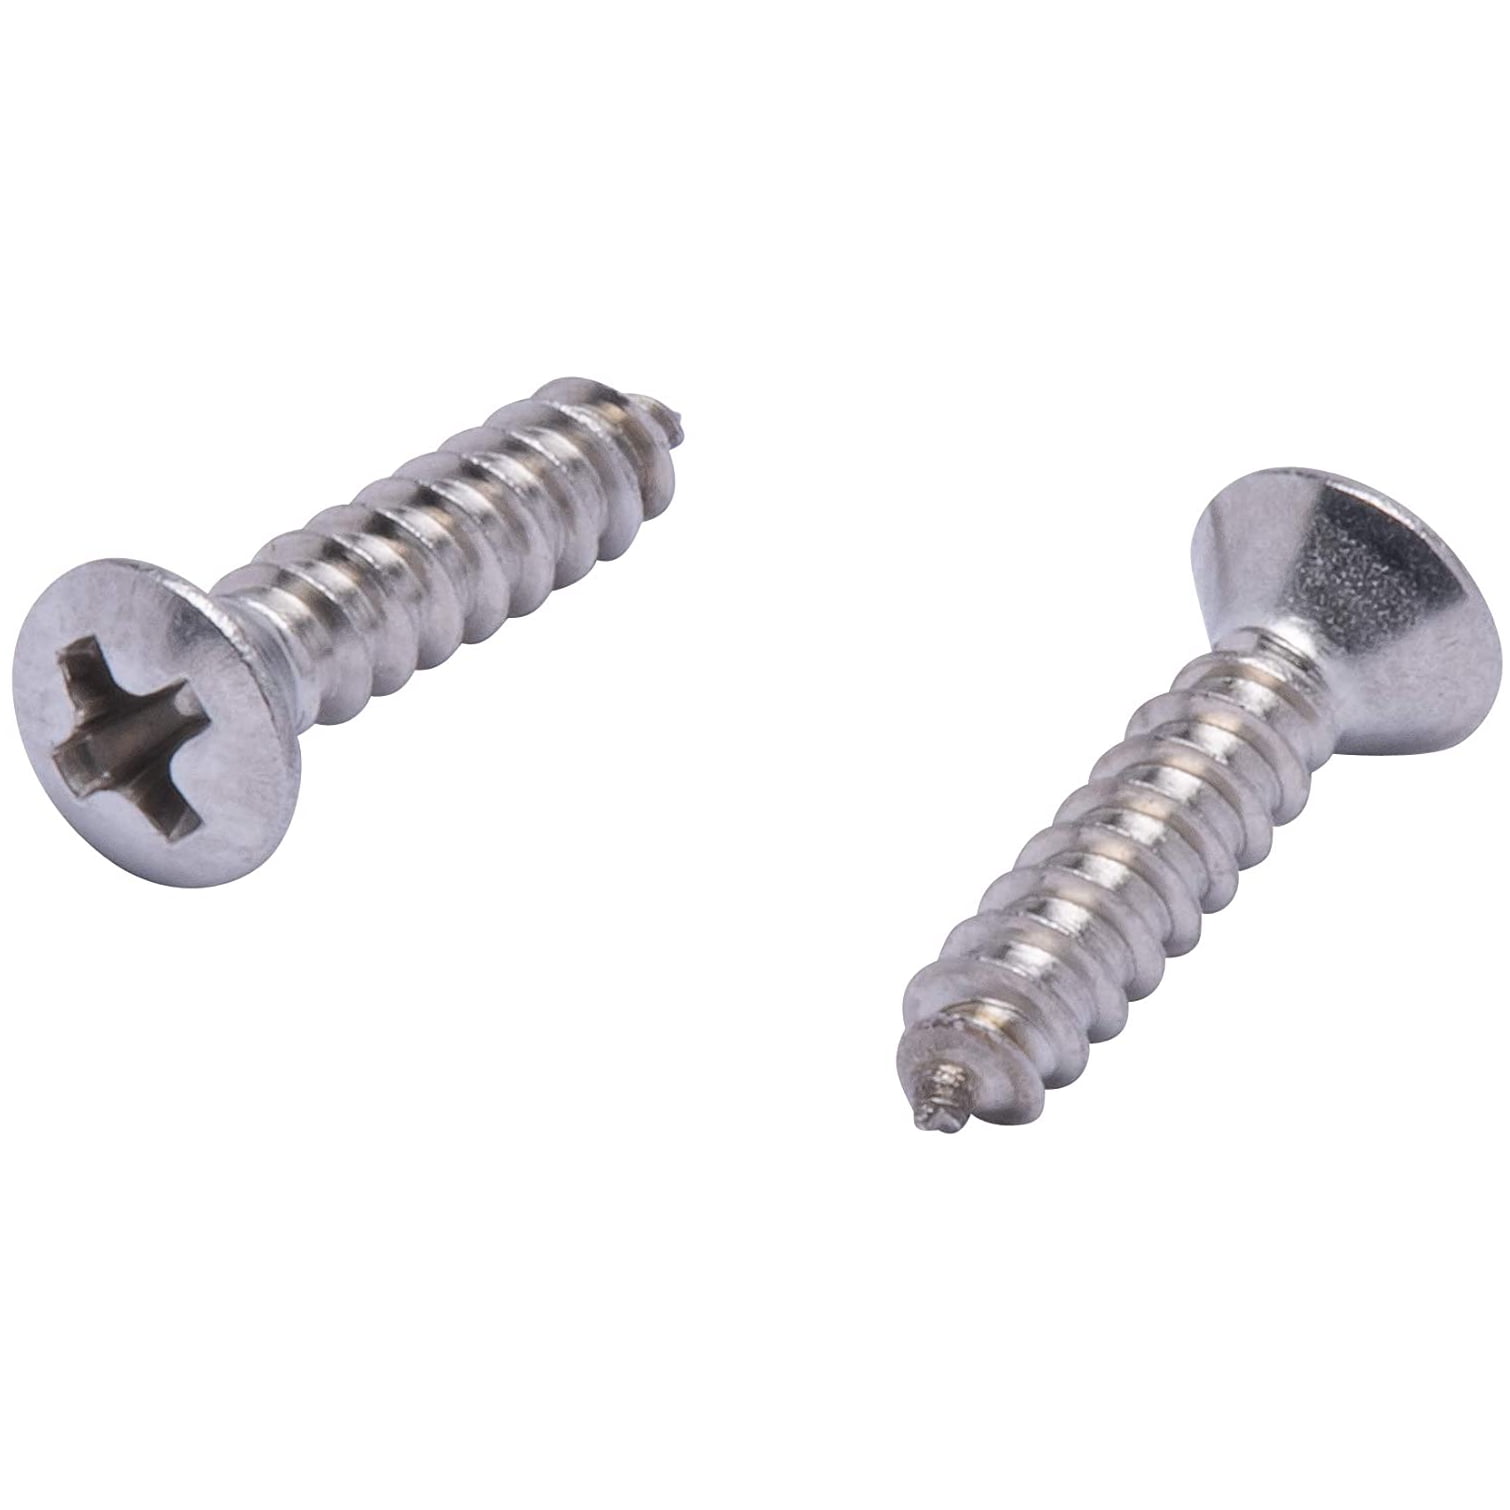 #8 x 2-1/2" Oval Head Sheet Metal Screws Stainless Steel Slotted Drive Qty 50 